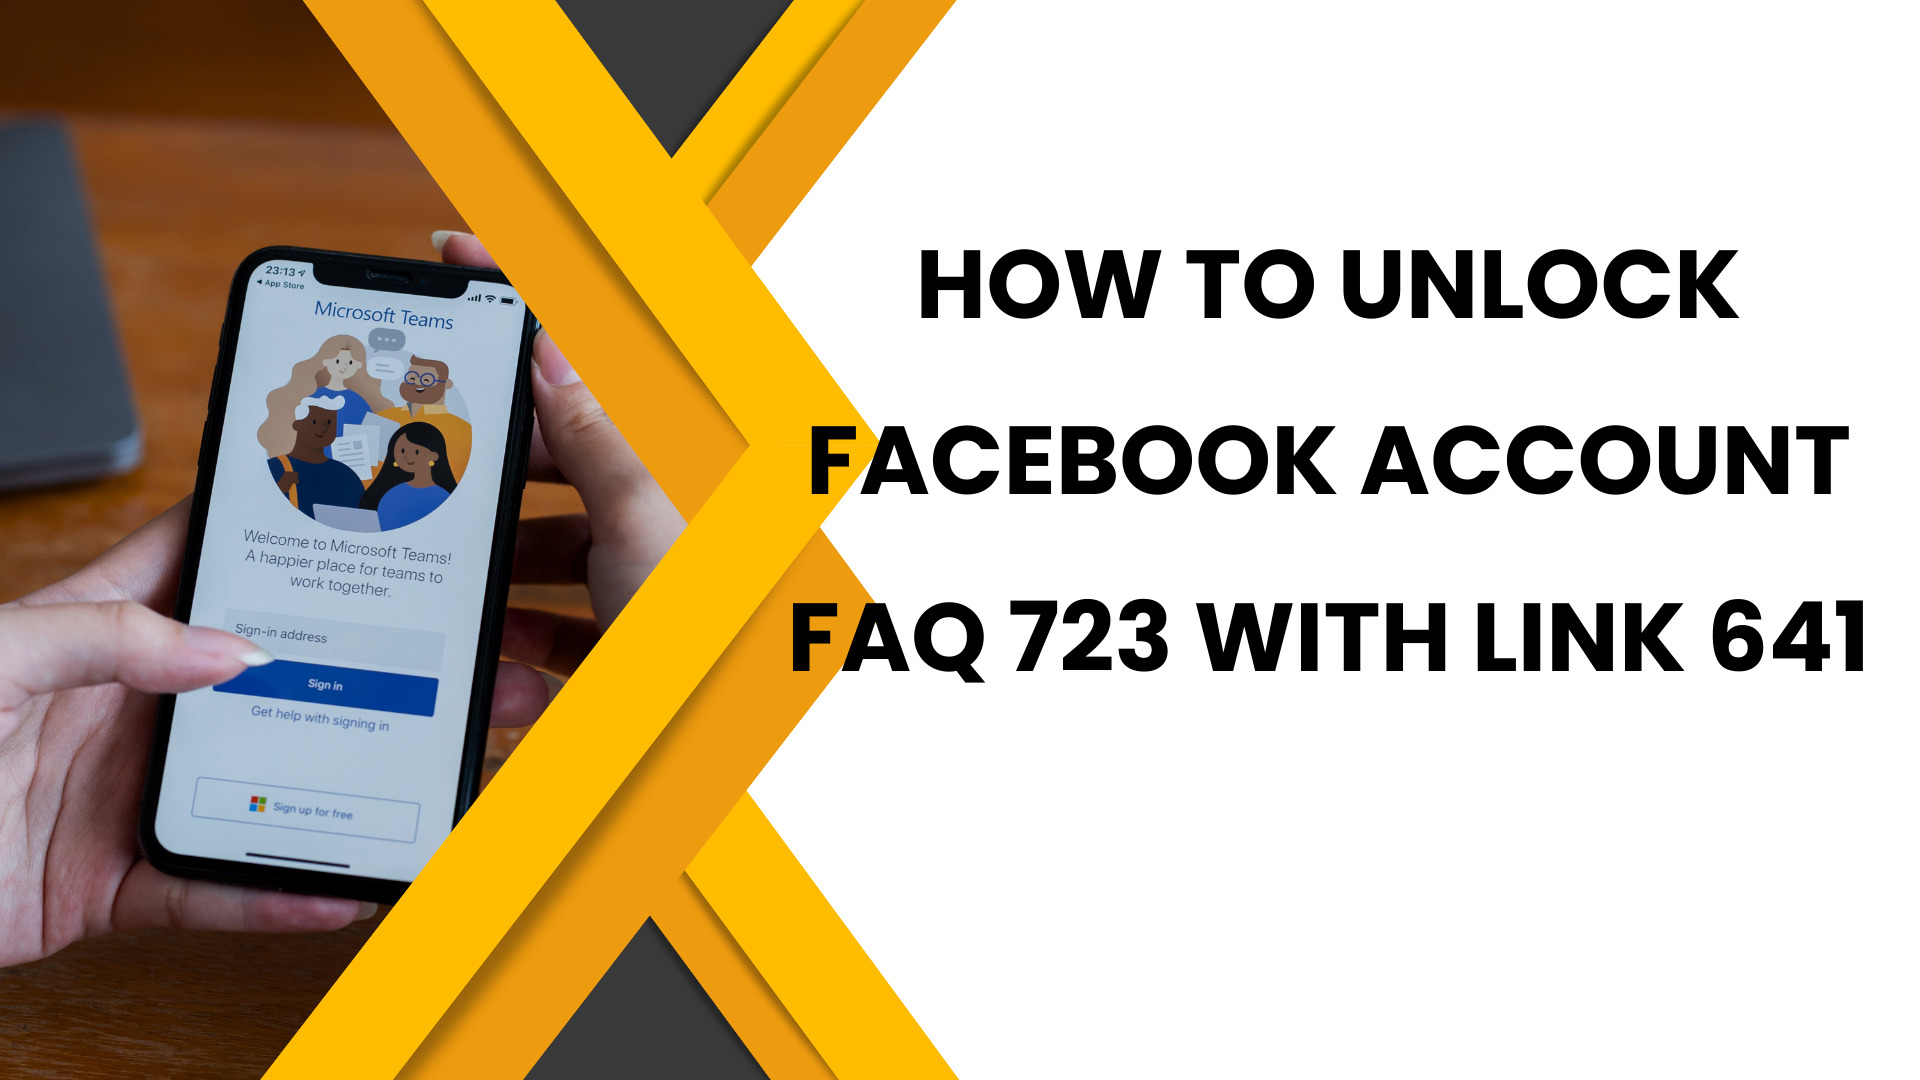 How to unlock Facebook account FAQ 723 with Link 641